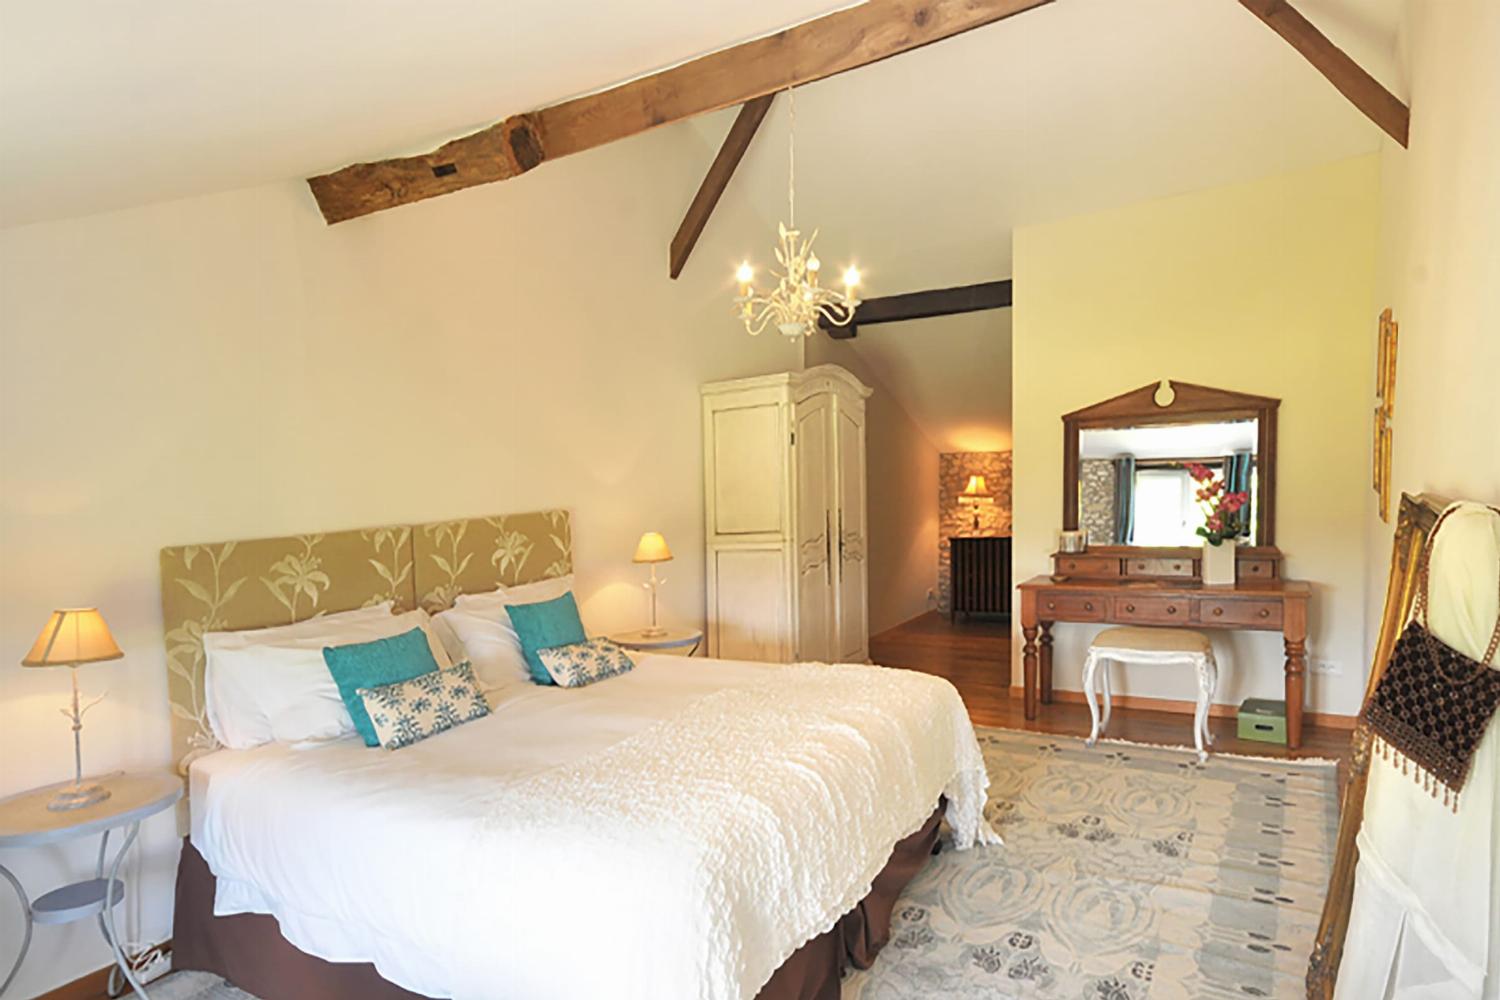 Bedroom | Holiday accommodation in Dordogne